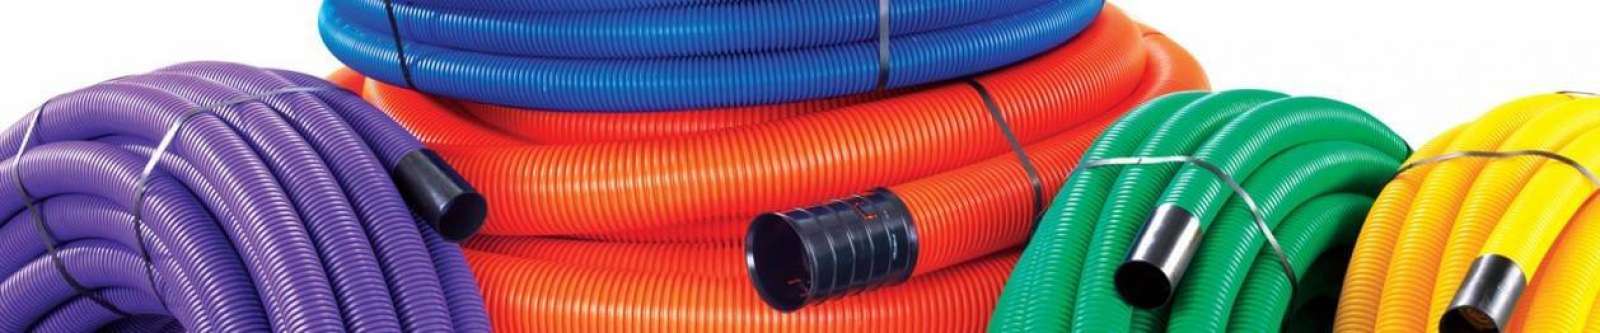 Ridgicoil Utilities | Cable Protection | Polypipe Civils